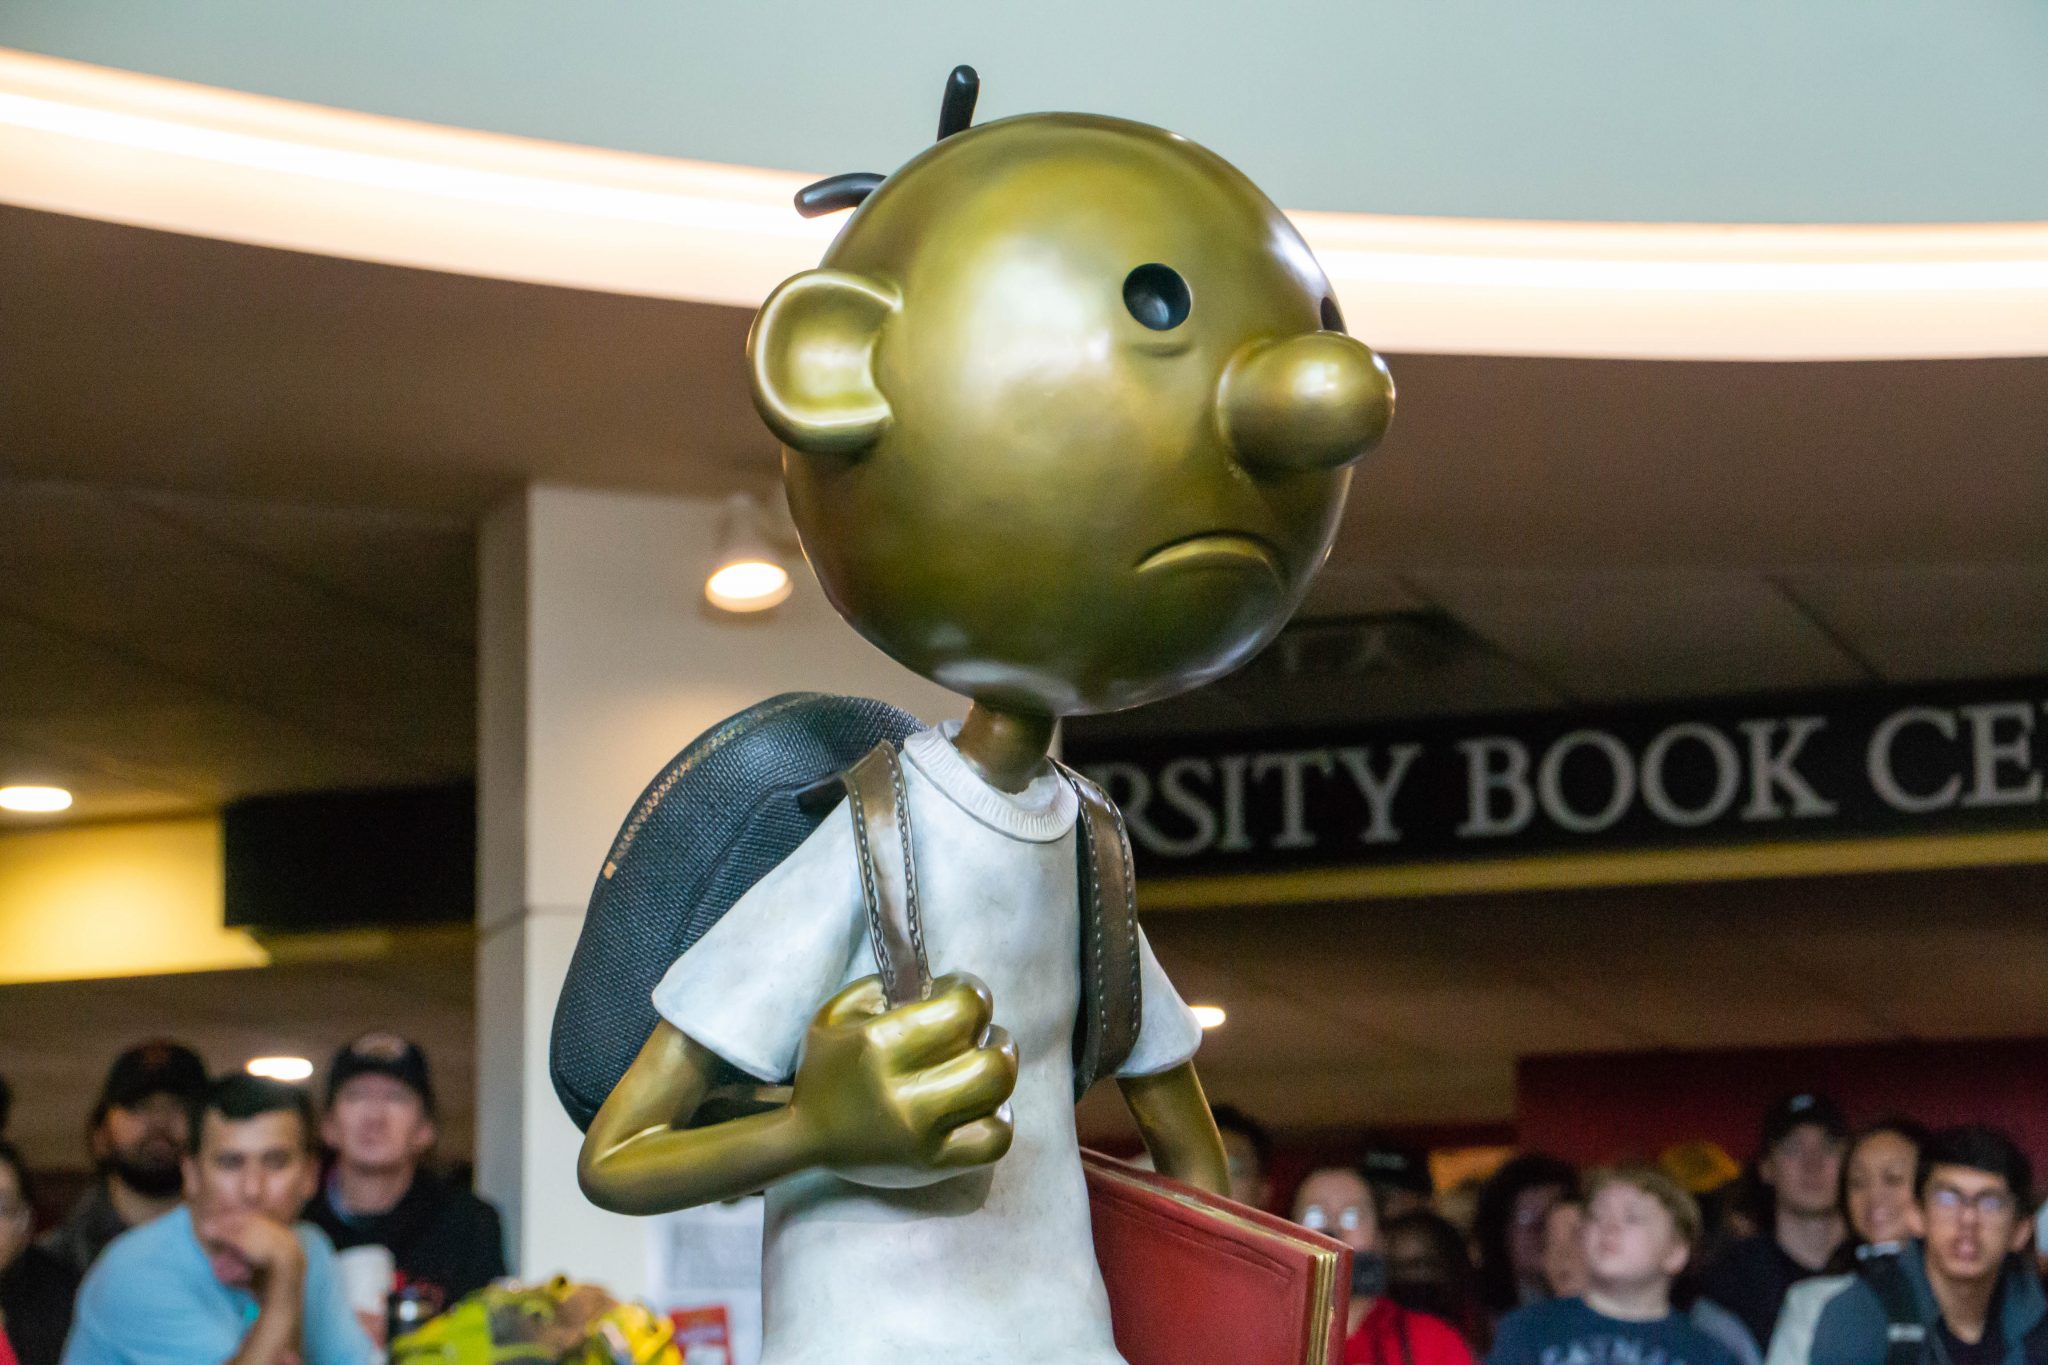 UMD should use the Greg Heffley statue as a book drive to spark a